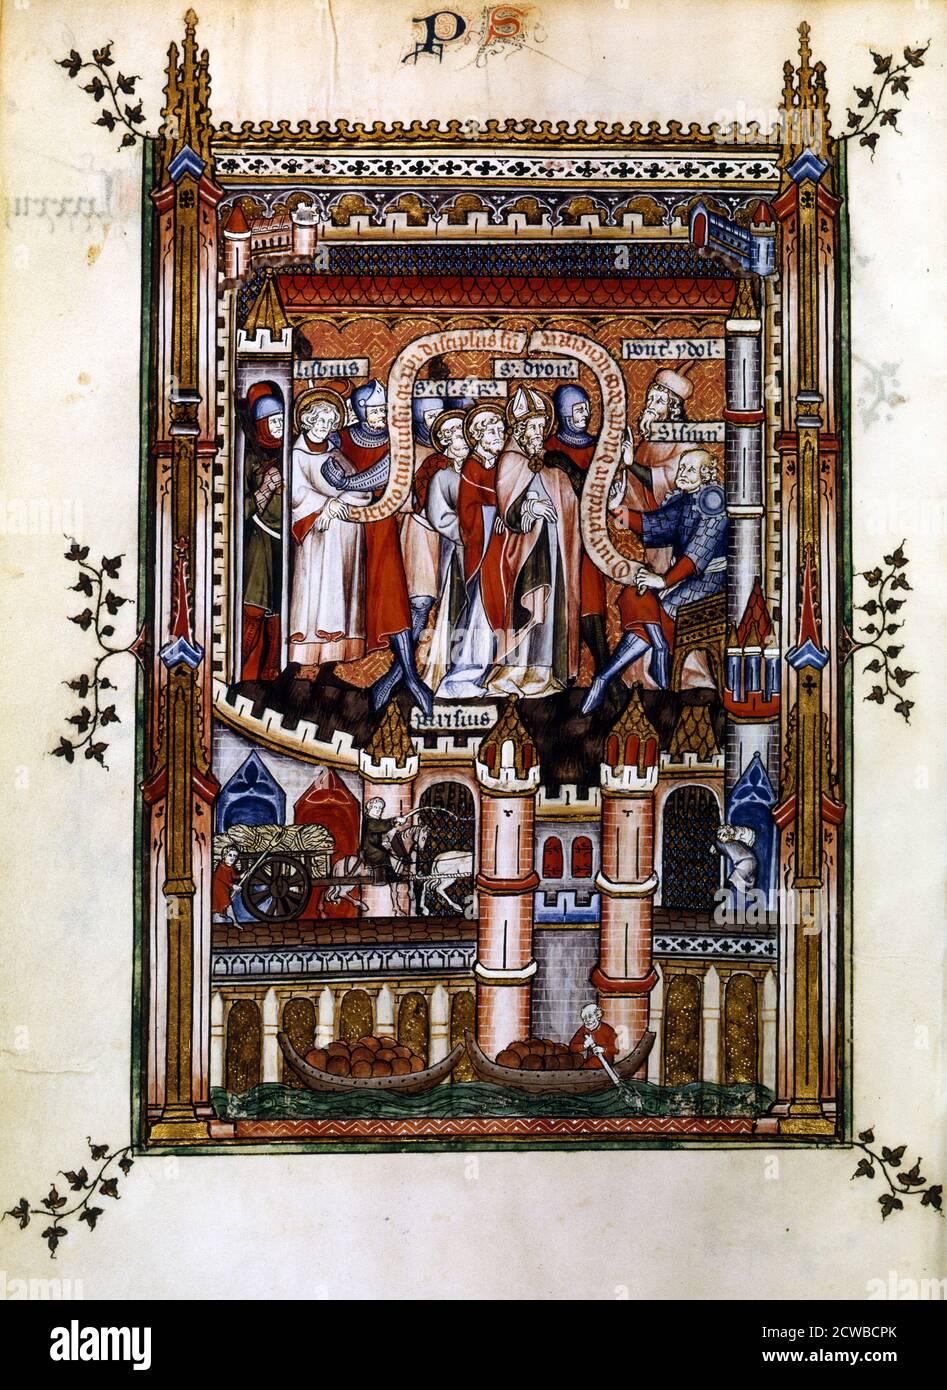 Lisbius proclaims himself a disciple of Christ, 1317. Lisbius declares his faith before St Denis, St Eleutherius and St Rusticus, in the presence of Sisinnius and his high priest. Manuscript illustration from a work on the life of St Denis (died c258 AD), written by Yves, a monk at the Abbey of St Denis. The book depicts the torture and martyrdom of the saint by the Roman governor Fescenninus Sisinnius. The lower scene depicts people on the bridge over the River Seine; showing a cart laden with sheaves of corn, a porter a boat laden with goods. From the collection of the Bibliotheque Nationale Stock Photo